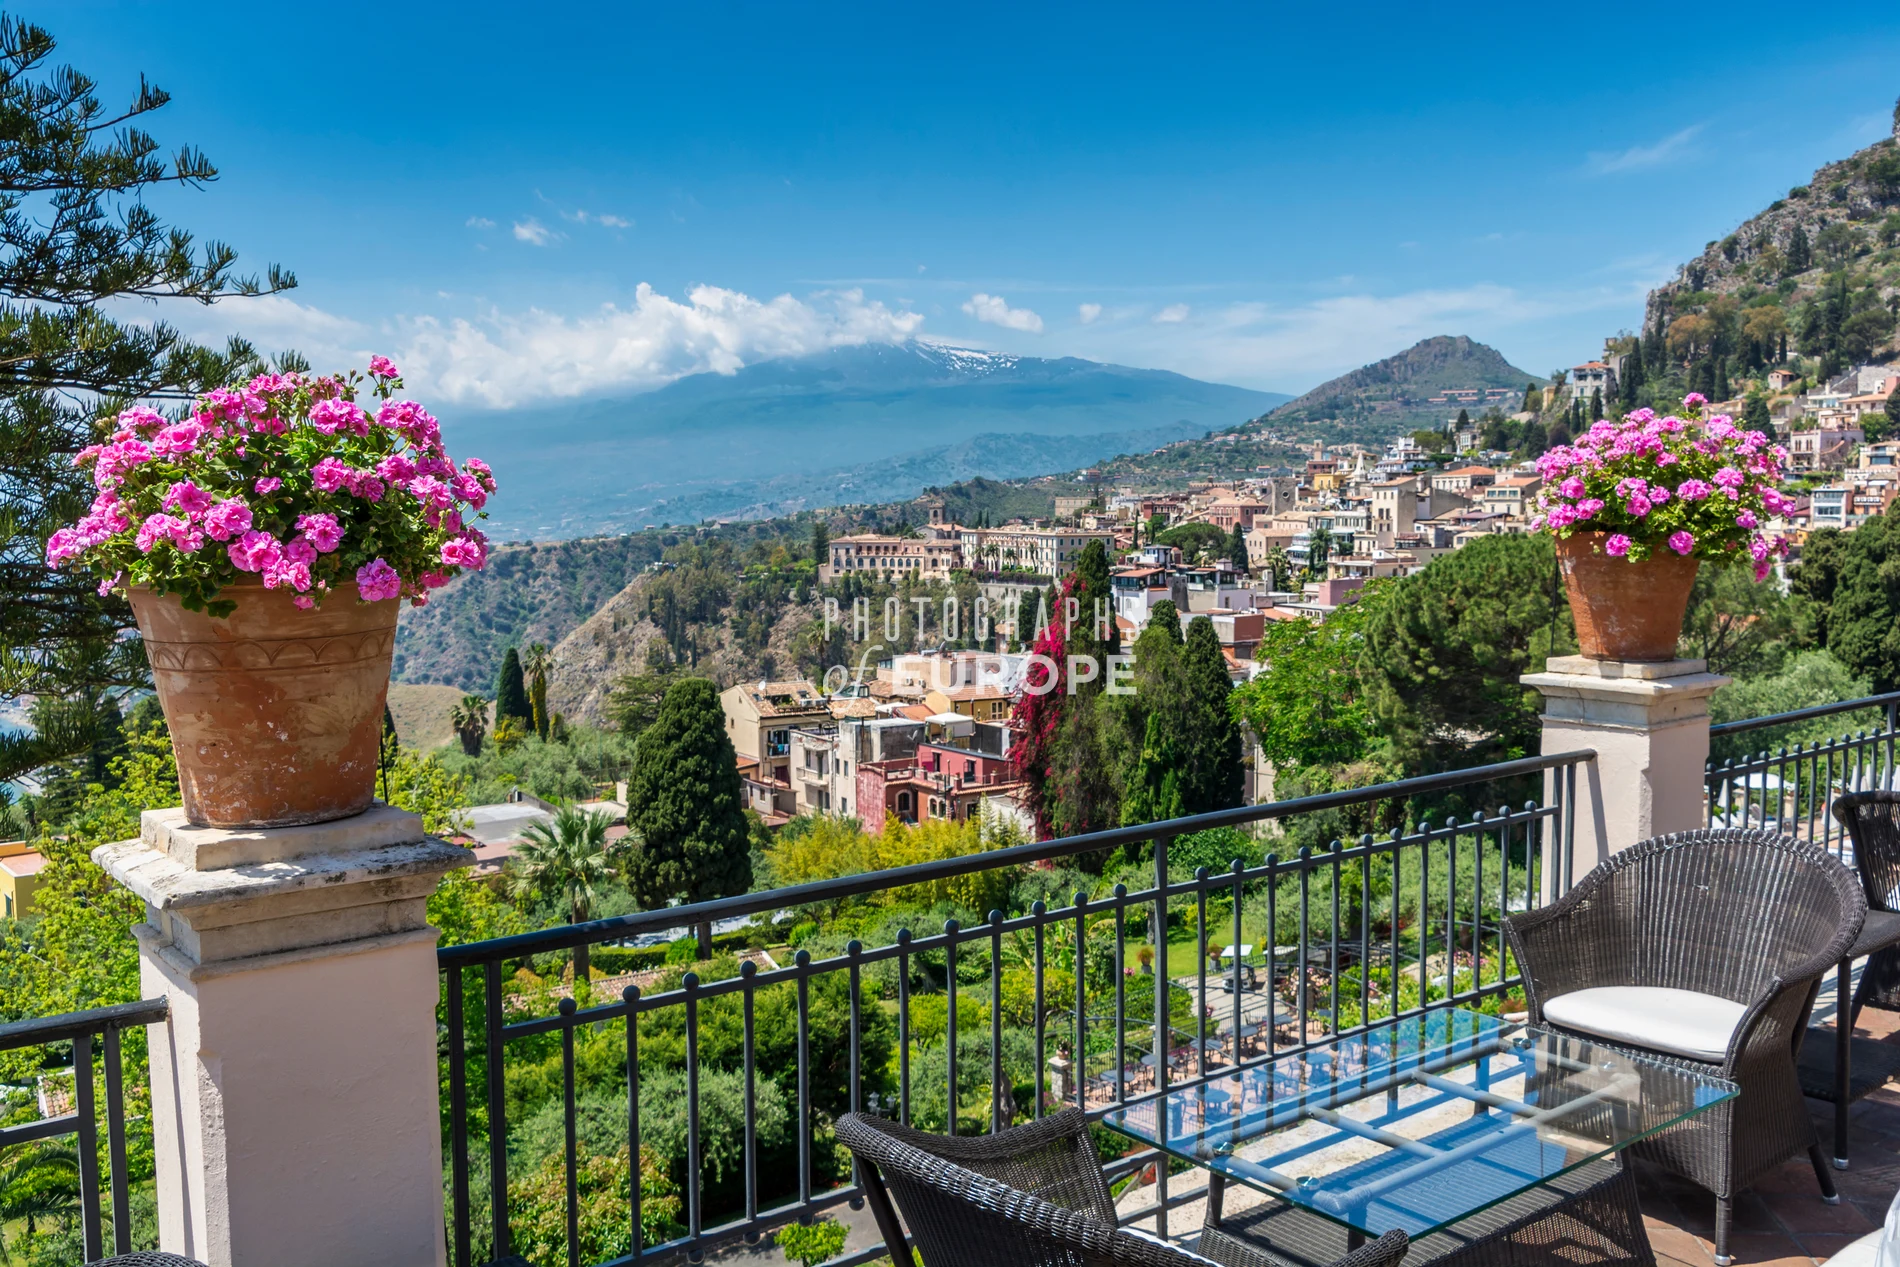 View-from-terrace-Belmond-Grand-Hotel-Timeo-Taormina-Sicily-Italy